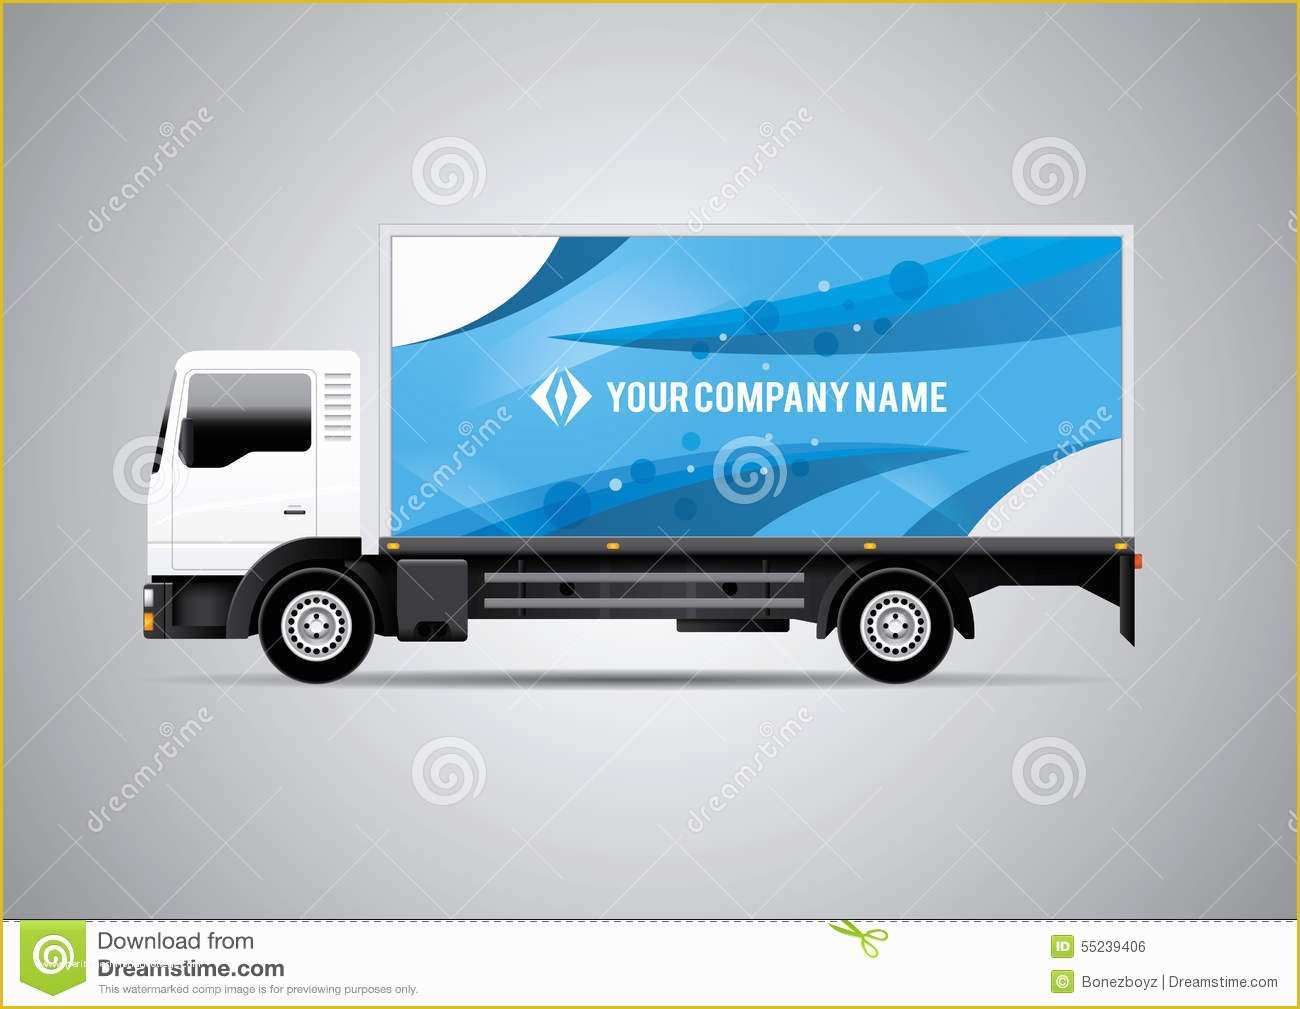 Truck Transport Website Templates Free Download Of Advertisement Corporate Identity Design Template